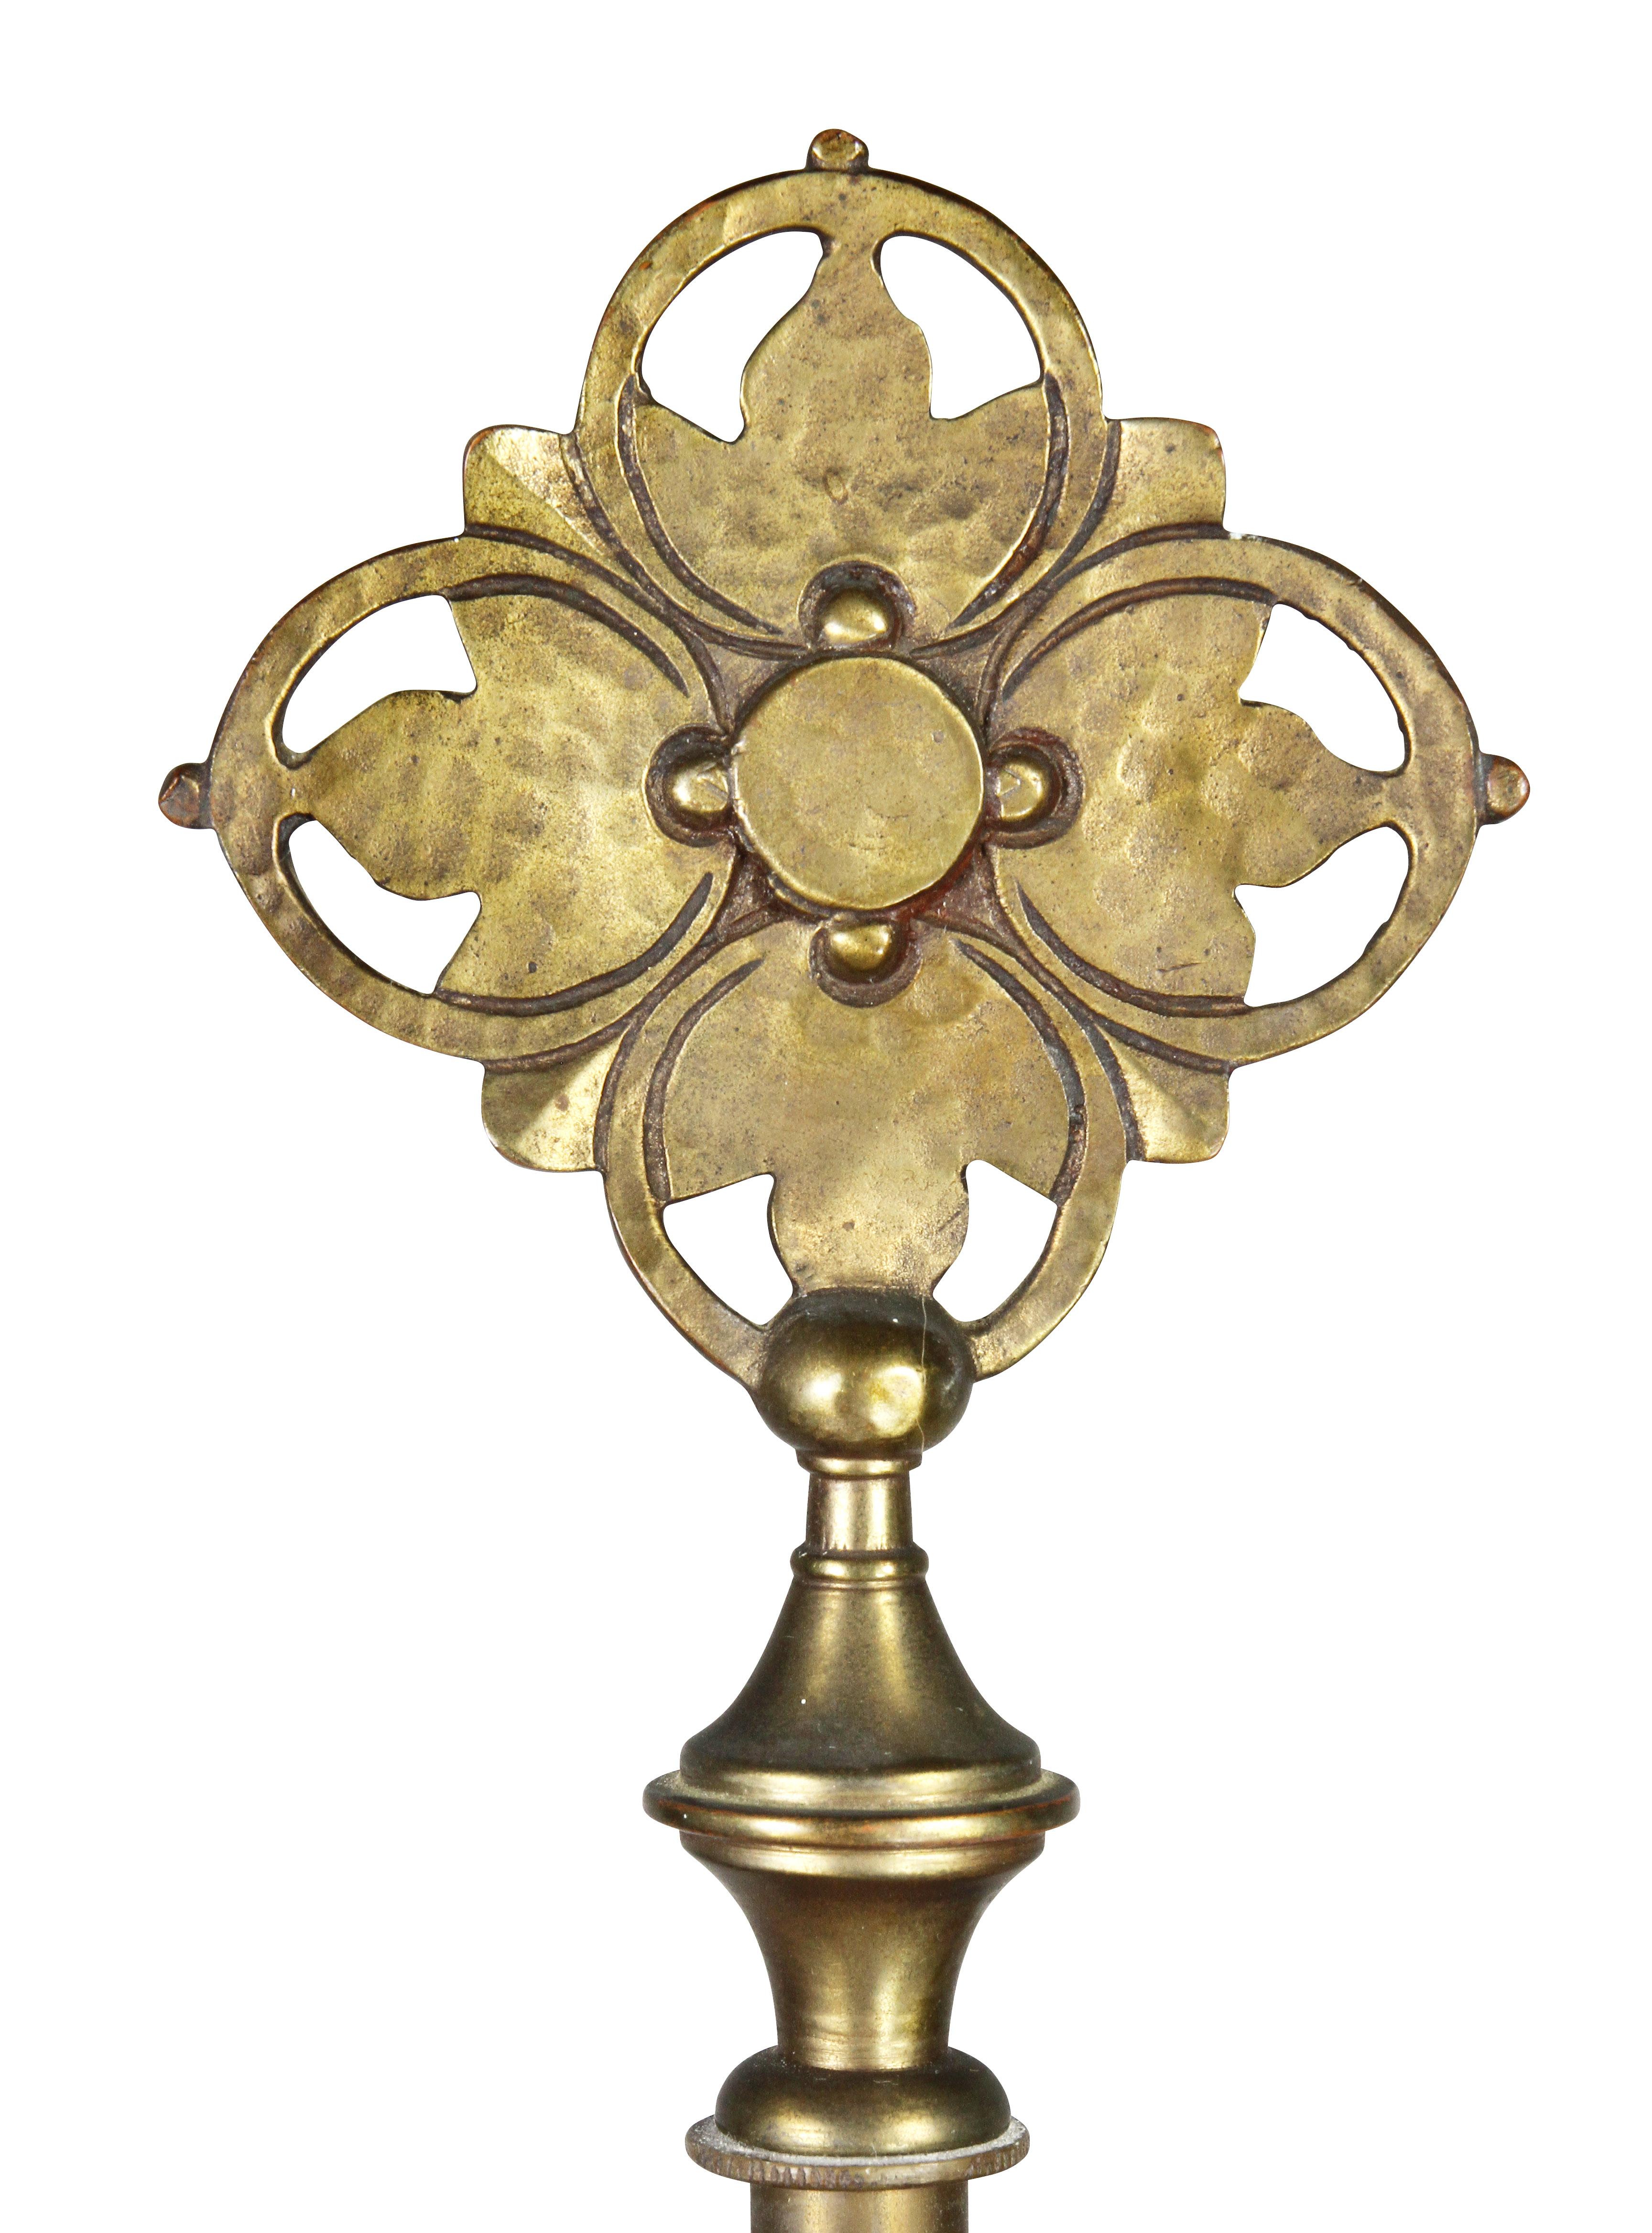 With original finial, typical form with circular base with incised decoration. Signed on base.